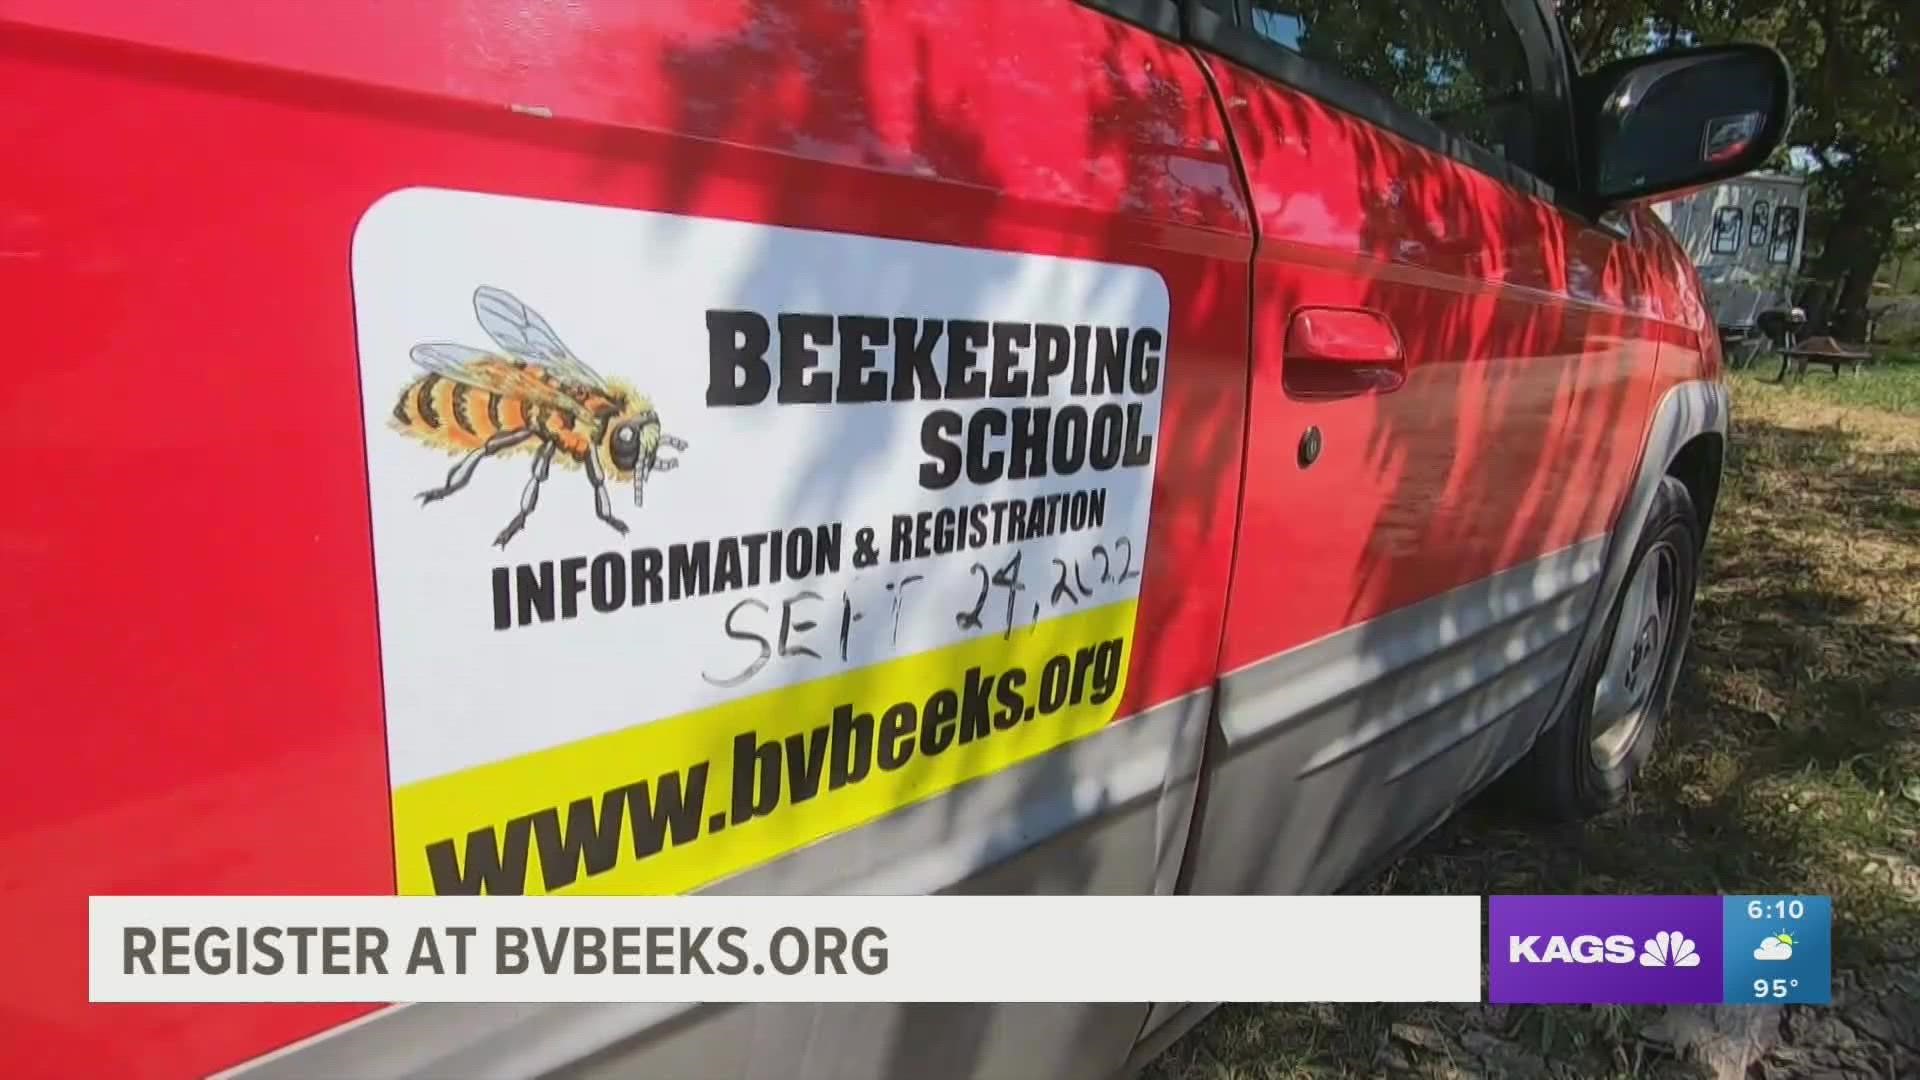 Lynn Burlbaw, the Co-Director of The Bee School, said that they currently have over 310 people signed up for this year's Saturday session.